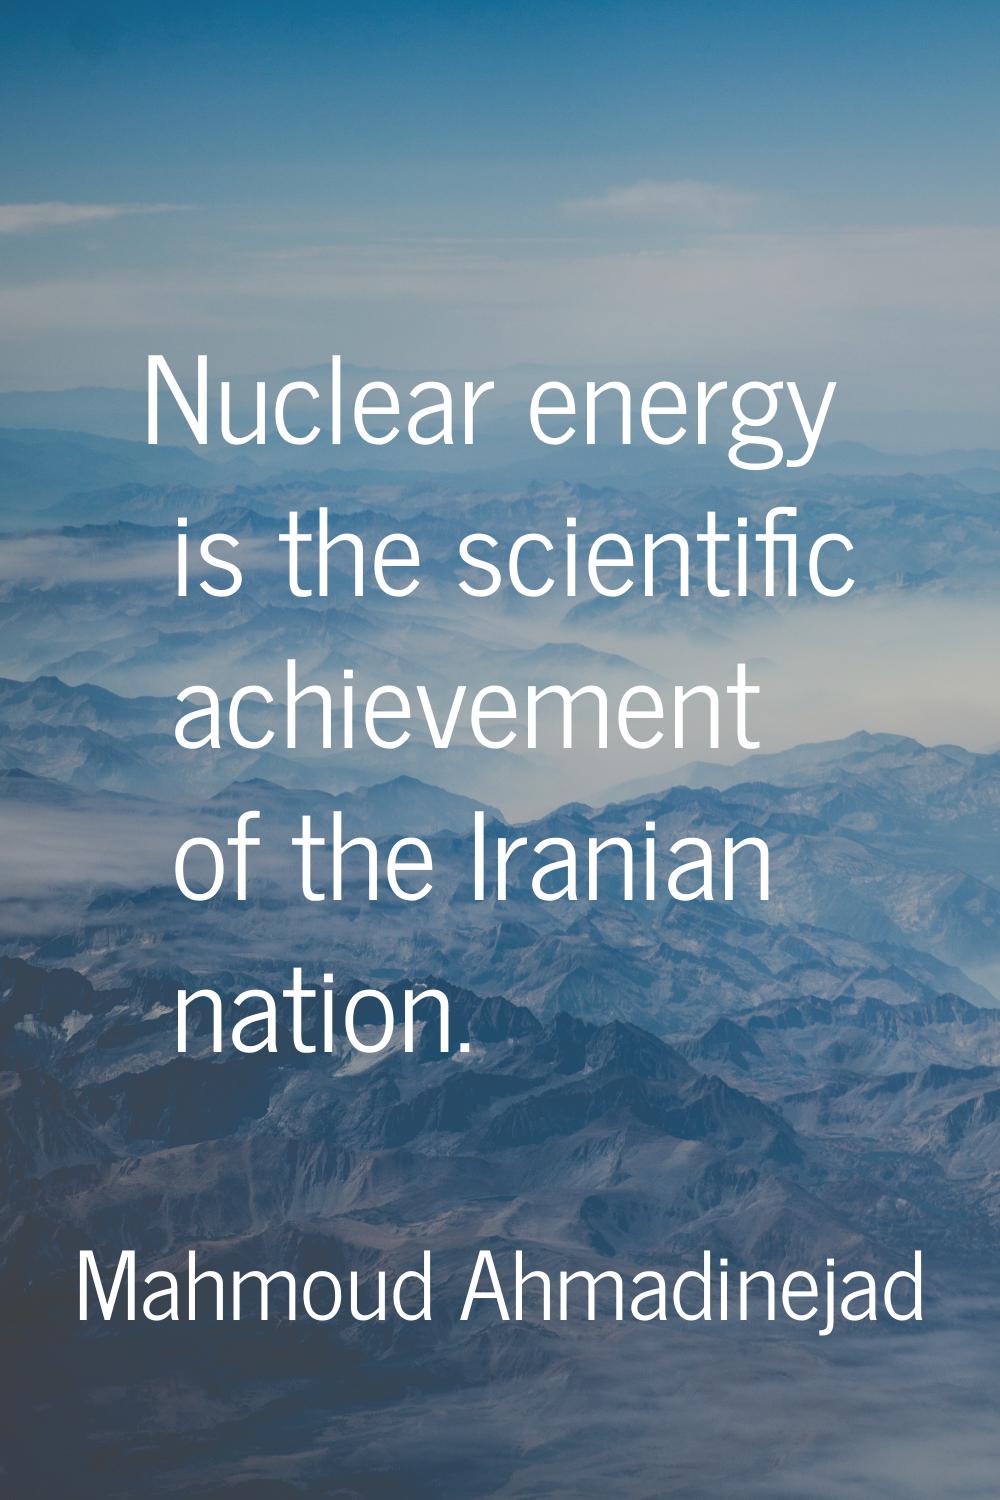 Nuclear energy is the scientific achievement of the Iranian nation.